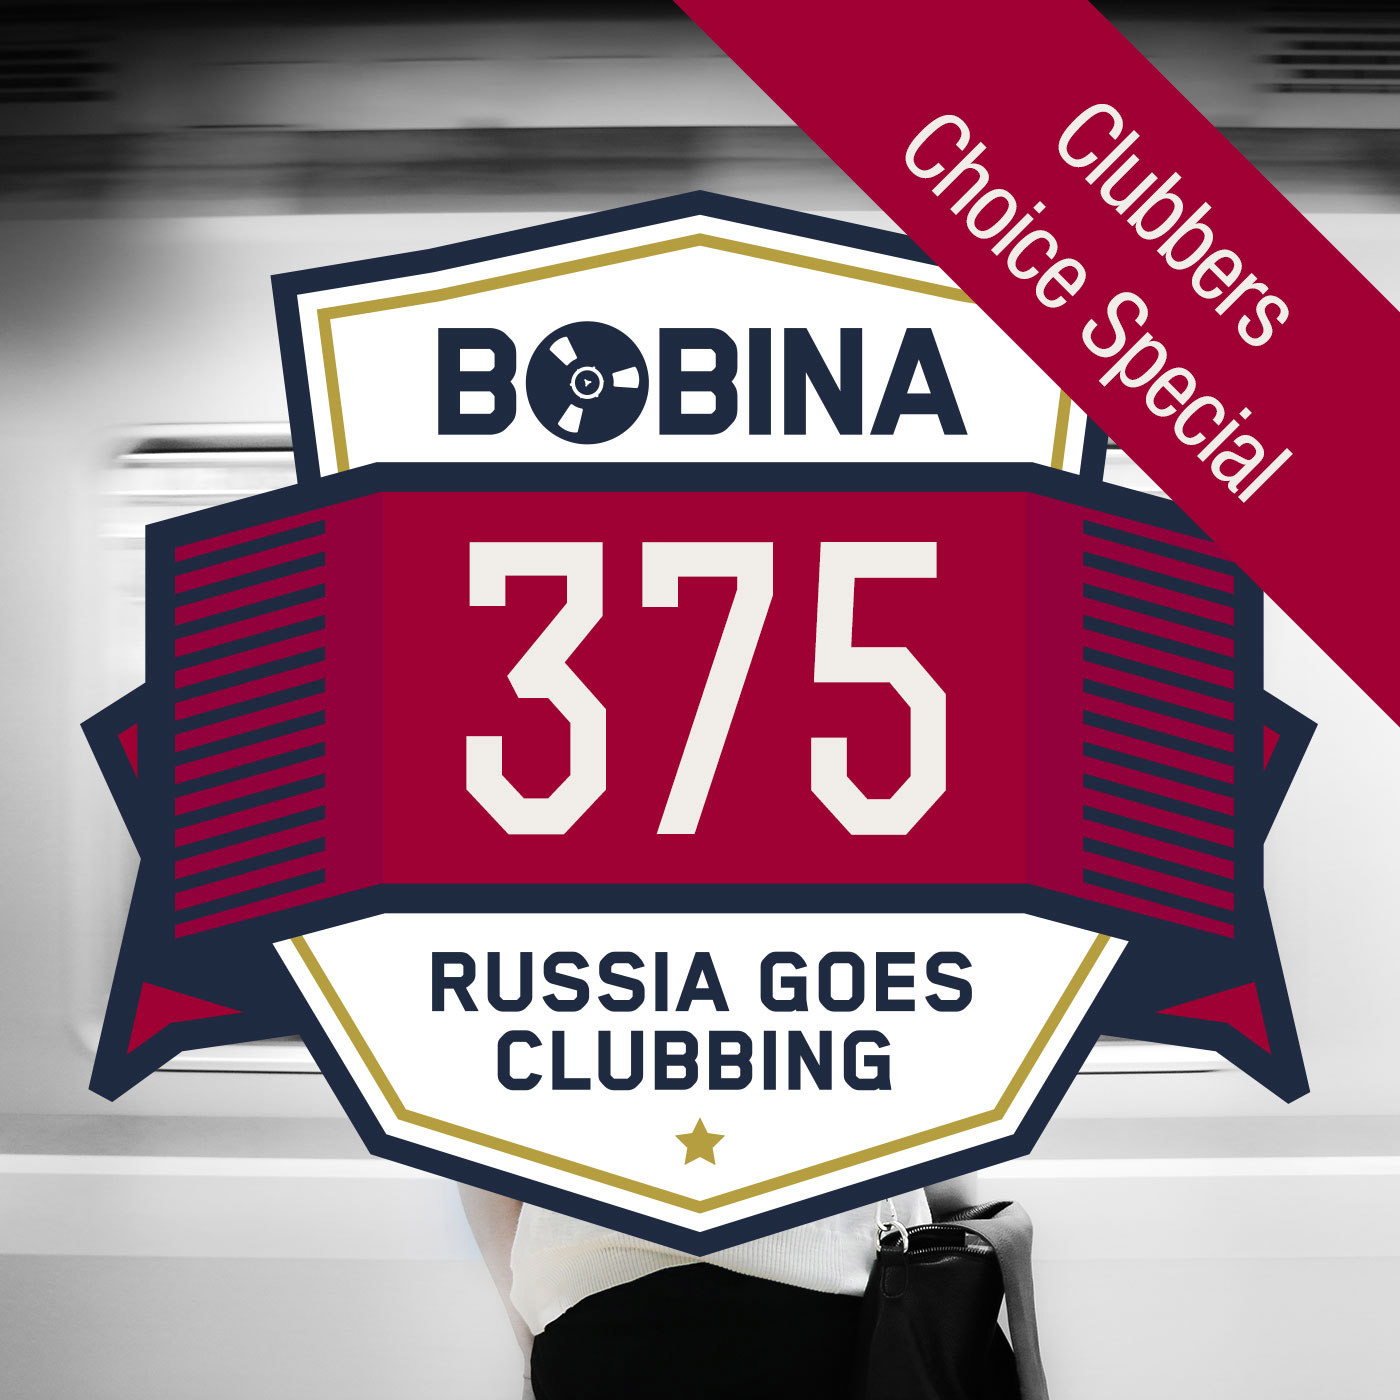 Bobina - Russia goes Clubbing. Choice specs. How to go to russia